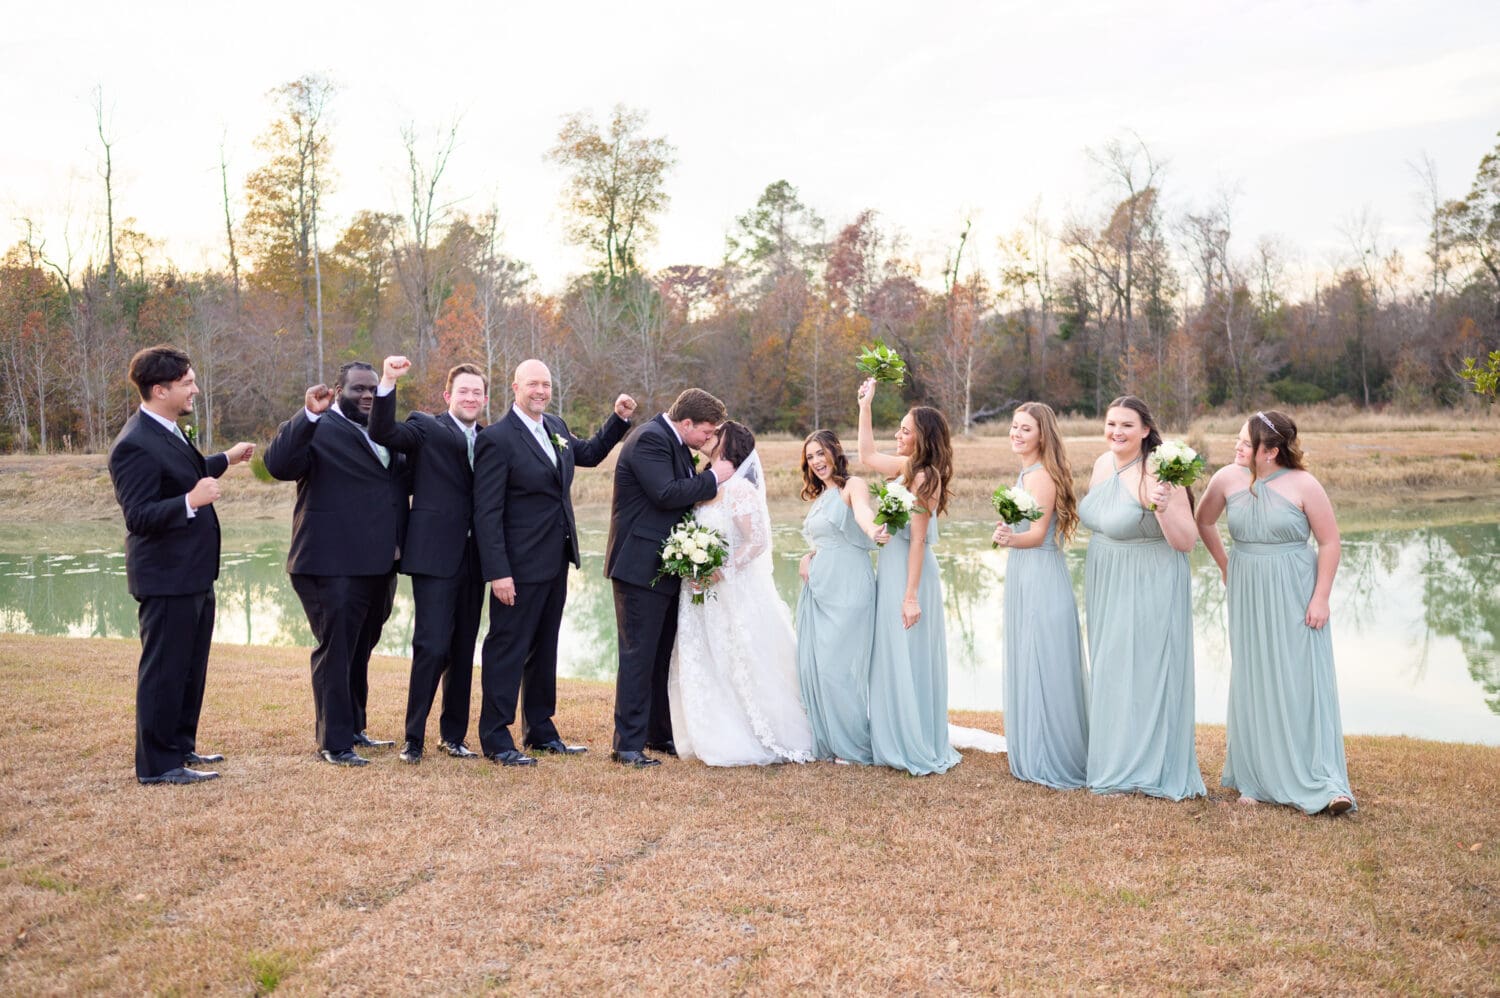 Bridal party cheering from bride and groom - The Venue at White Oaks Farm